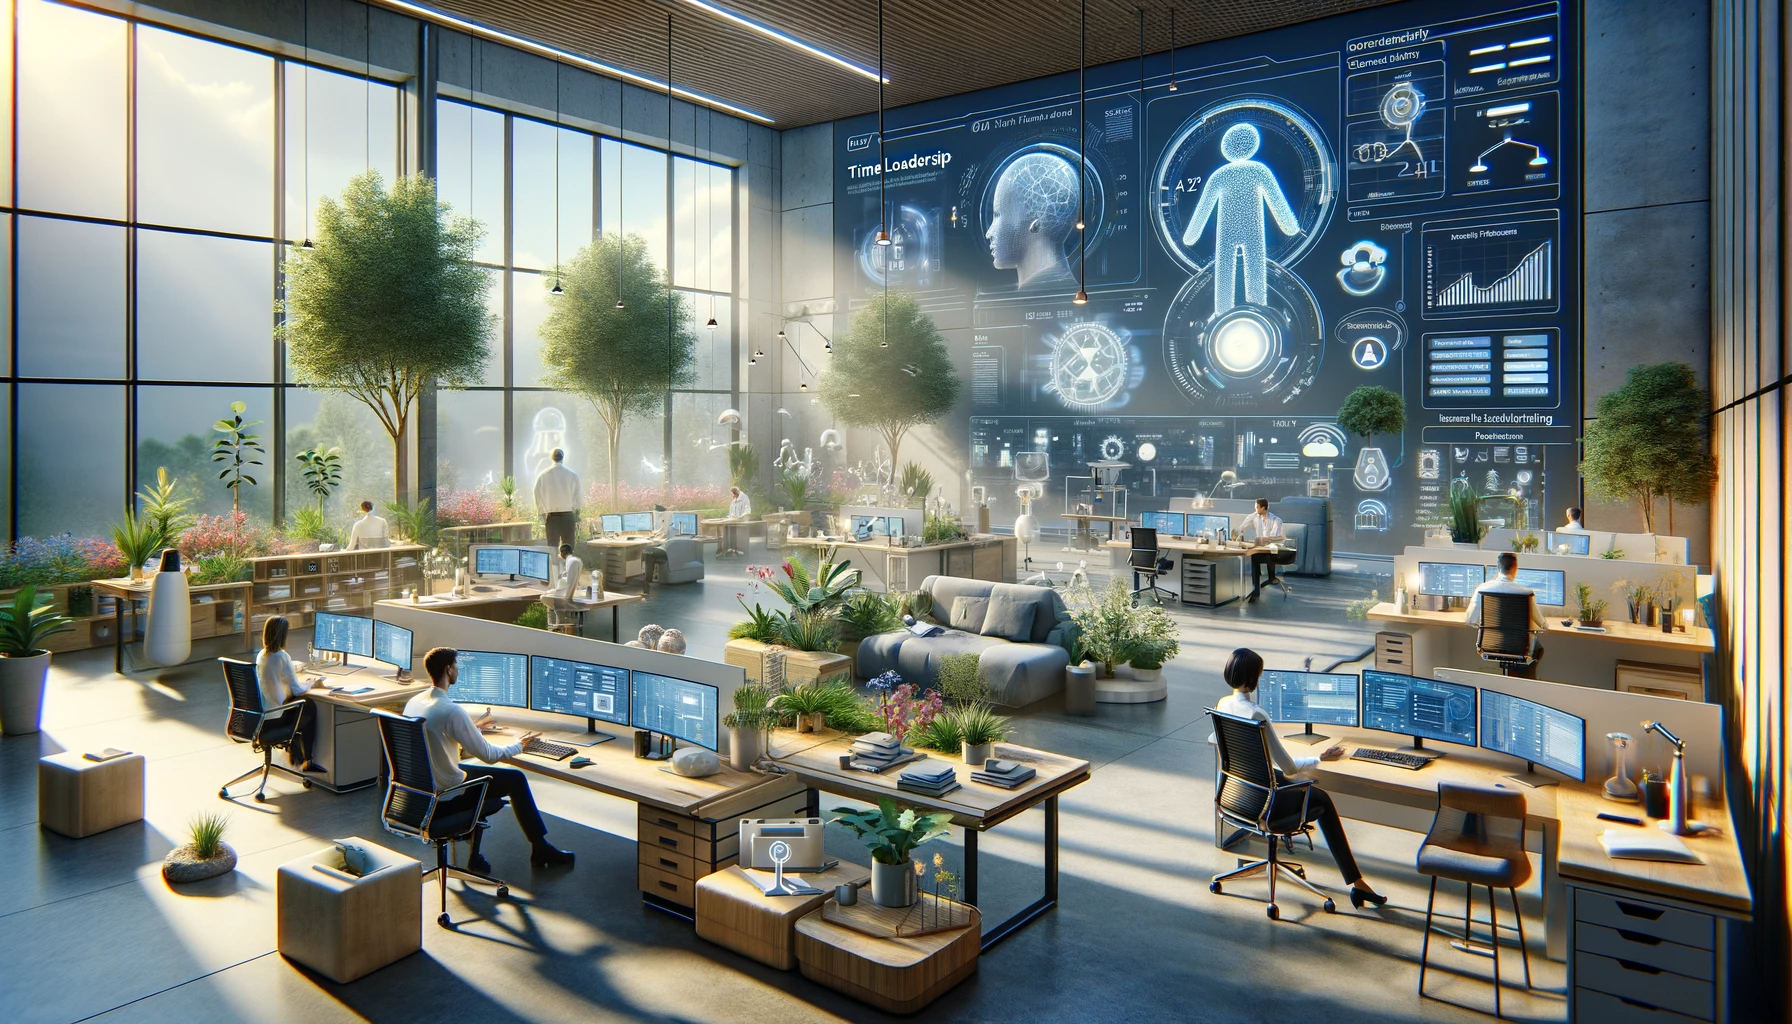 Lush office space with AI analytics displays, showcasing a future of work where nature meets advanced technology.